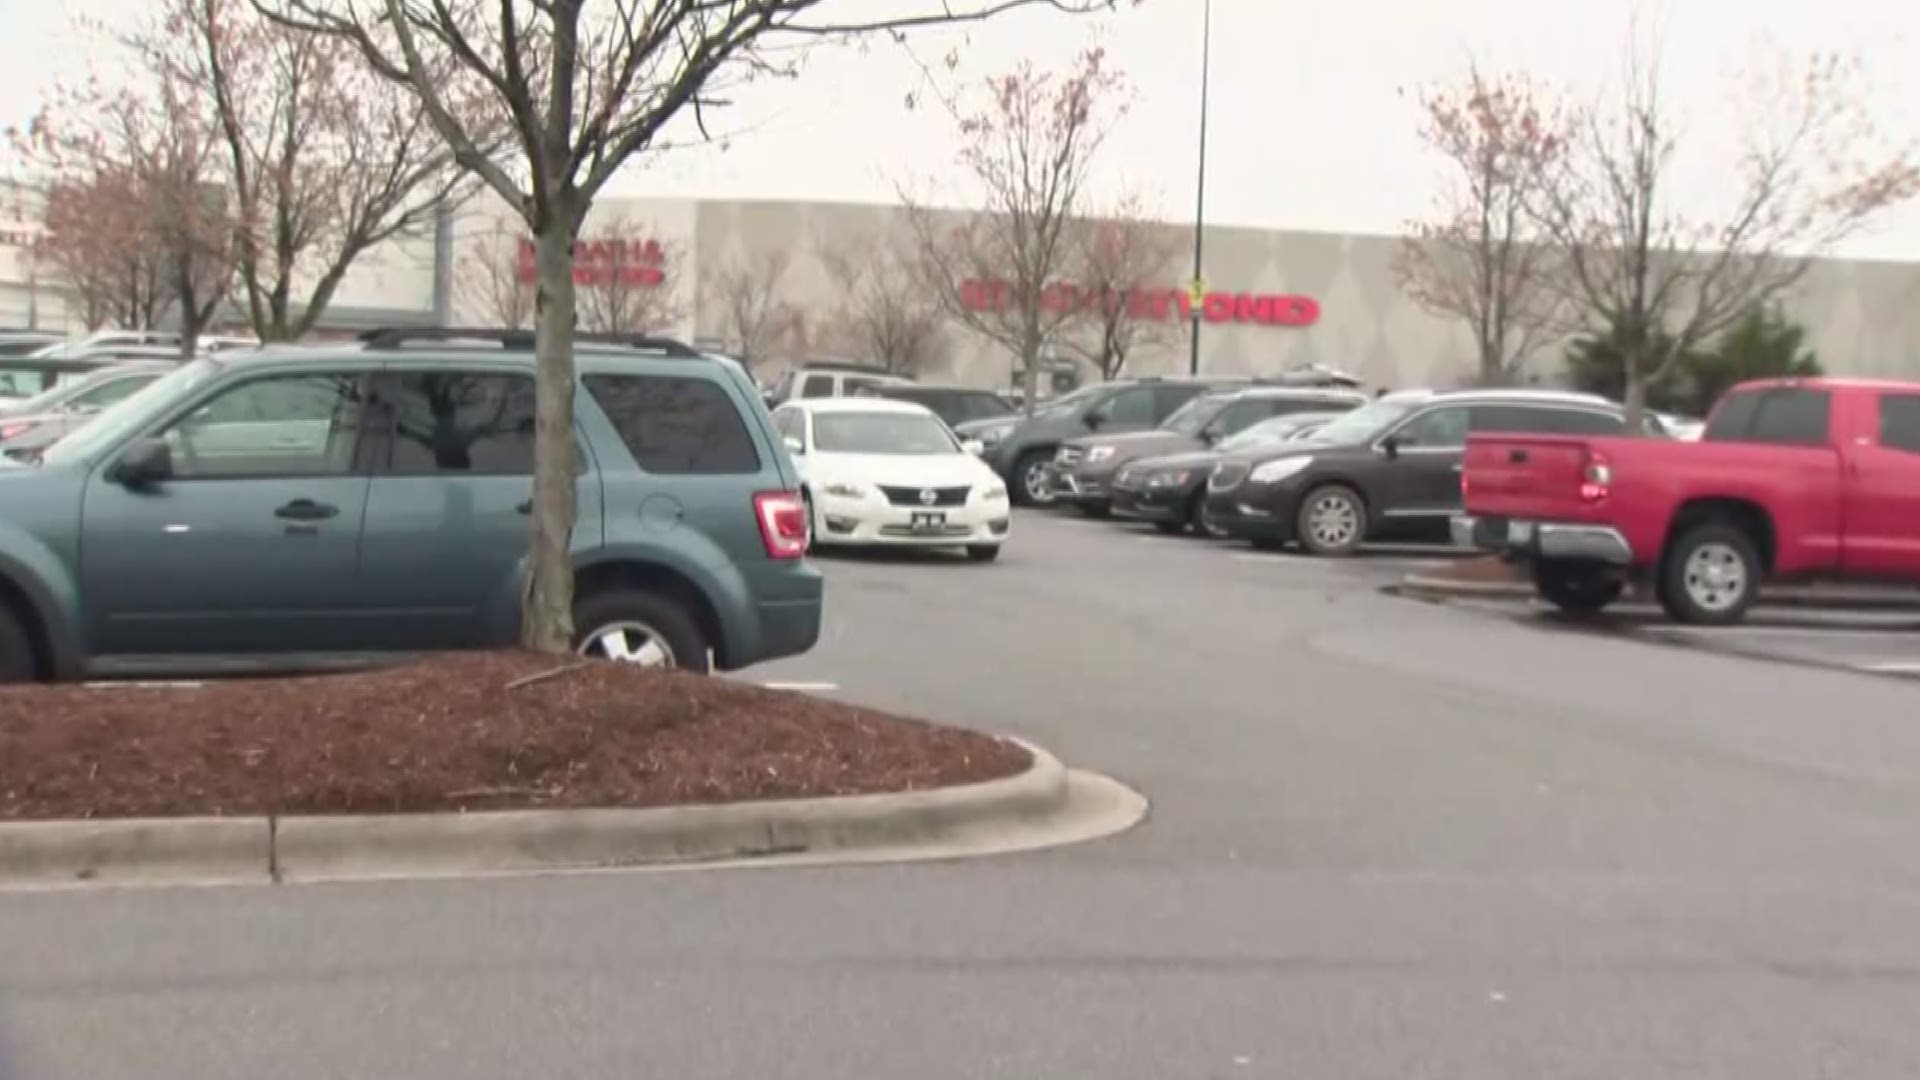 A woman shared a post on Facebook claiming she "locked eyes" with a strange man in the parking lot near Bed Bath and Beyond in Concord Mills Mall.
It says the man followed behind her into the mall and approached her. According to Concord Police "no crime occurred."